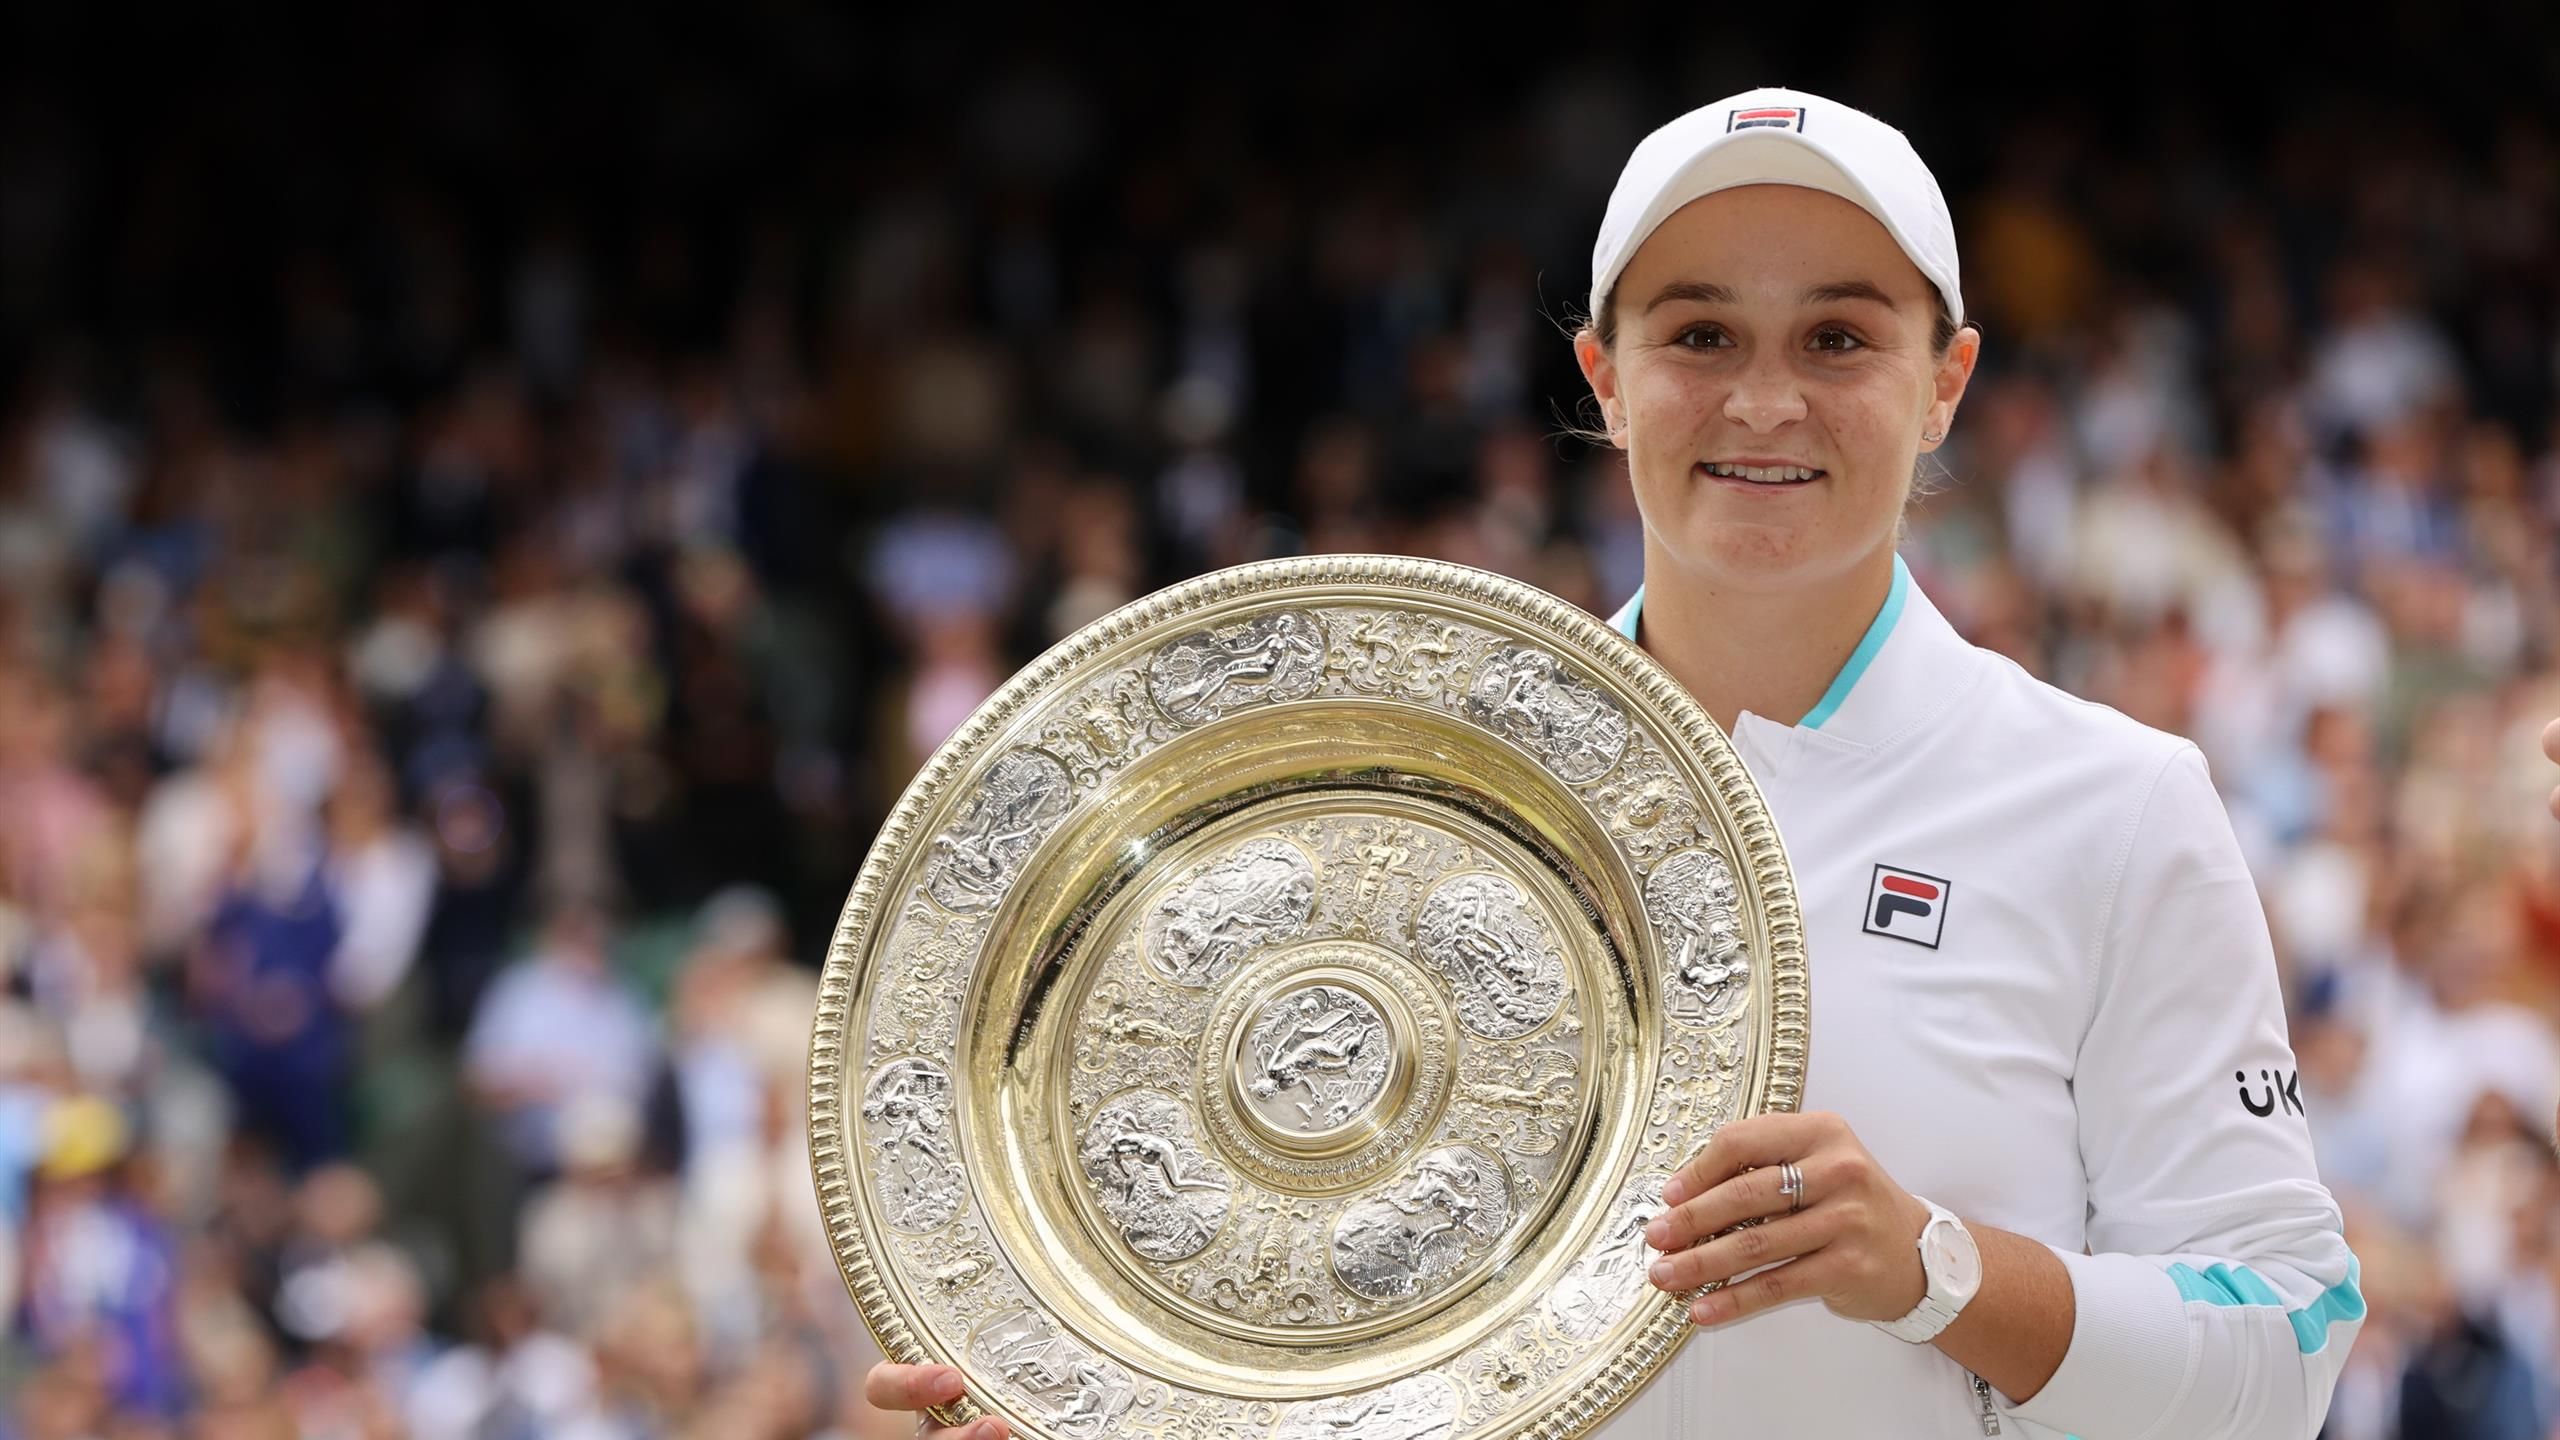 Wimbledon day 13: Ashleigh Barty crowned Wimbledon champion for first time